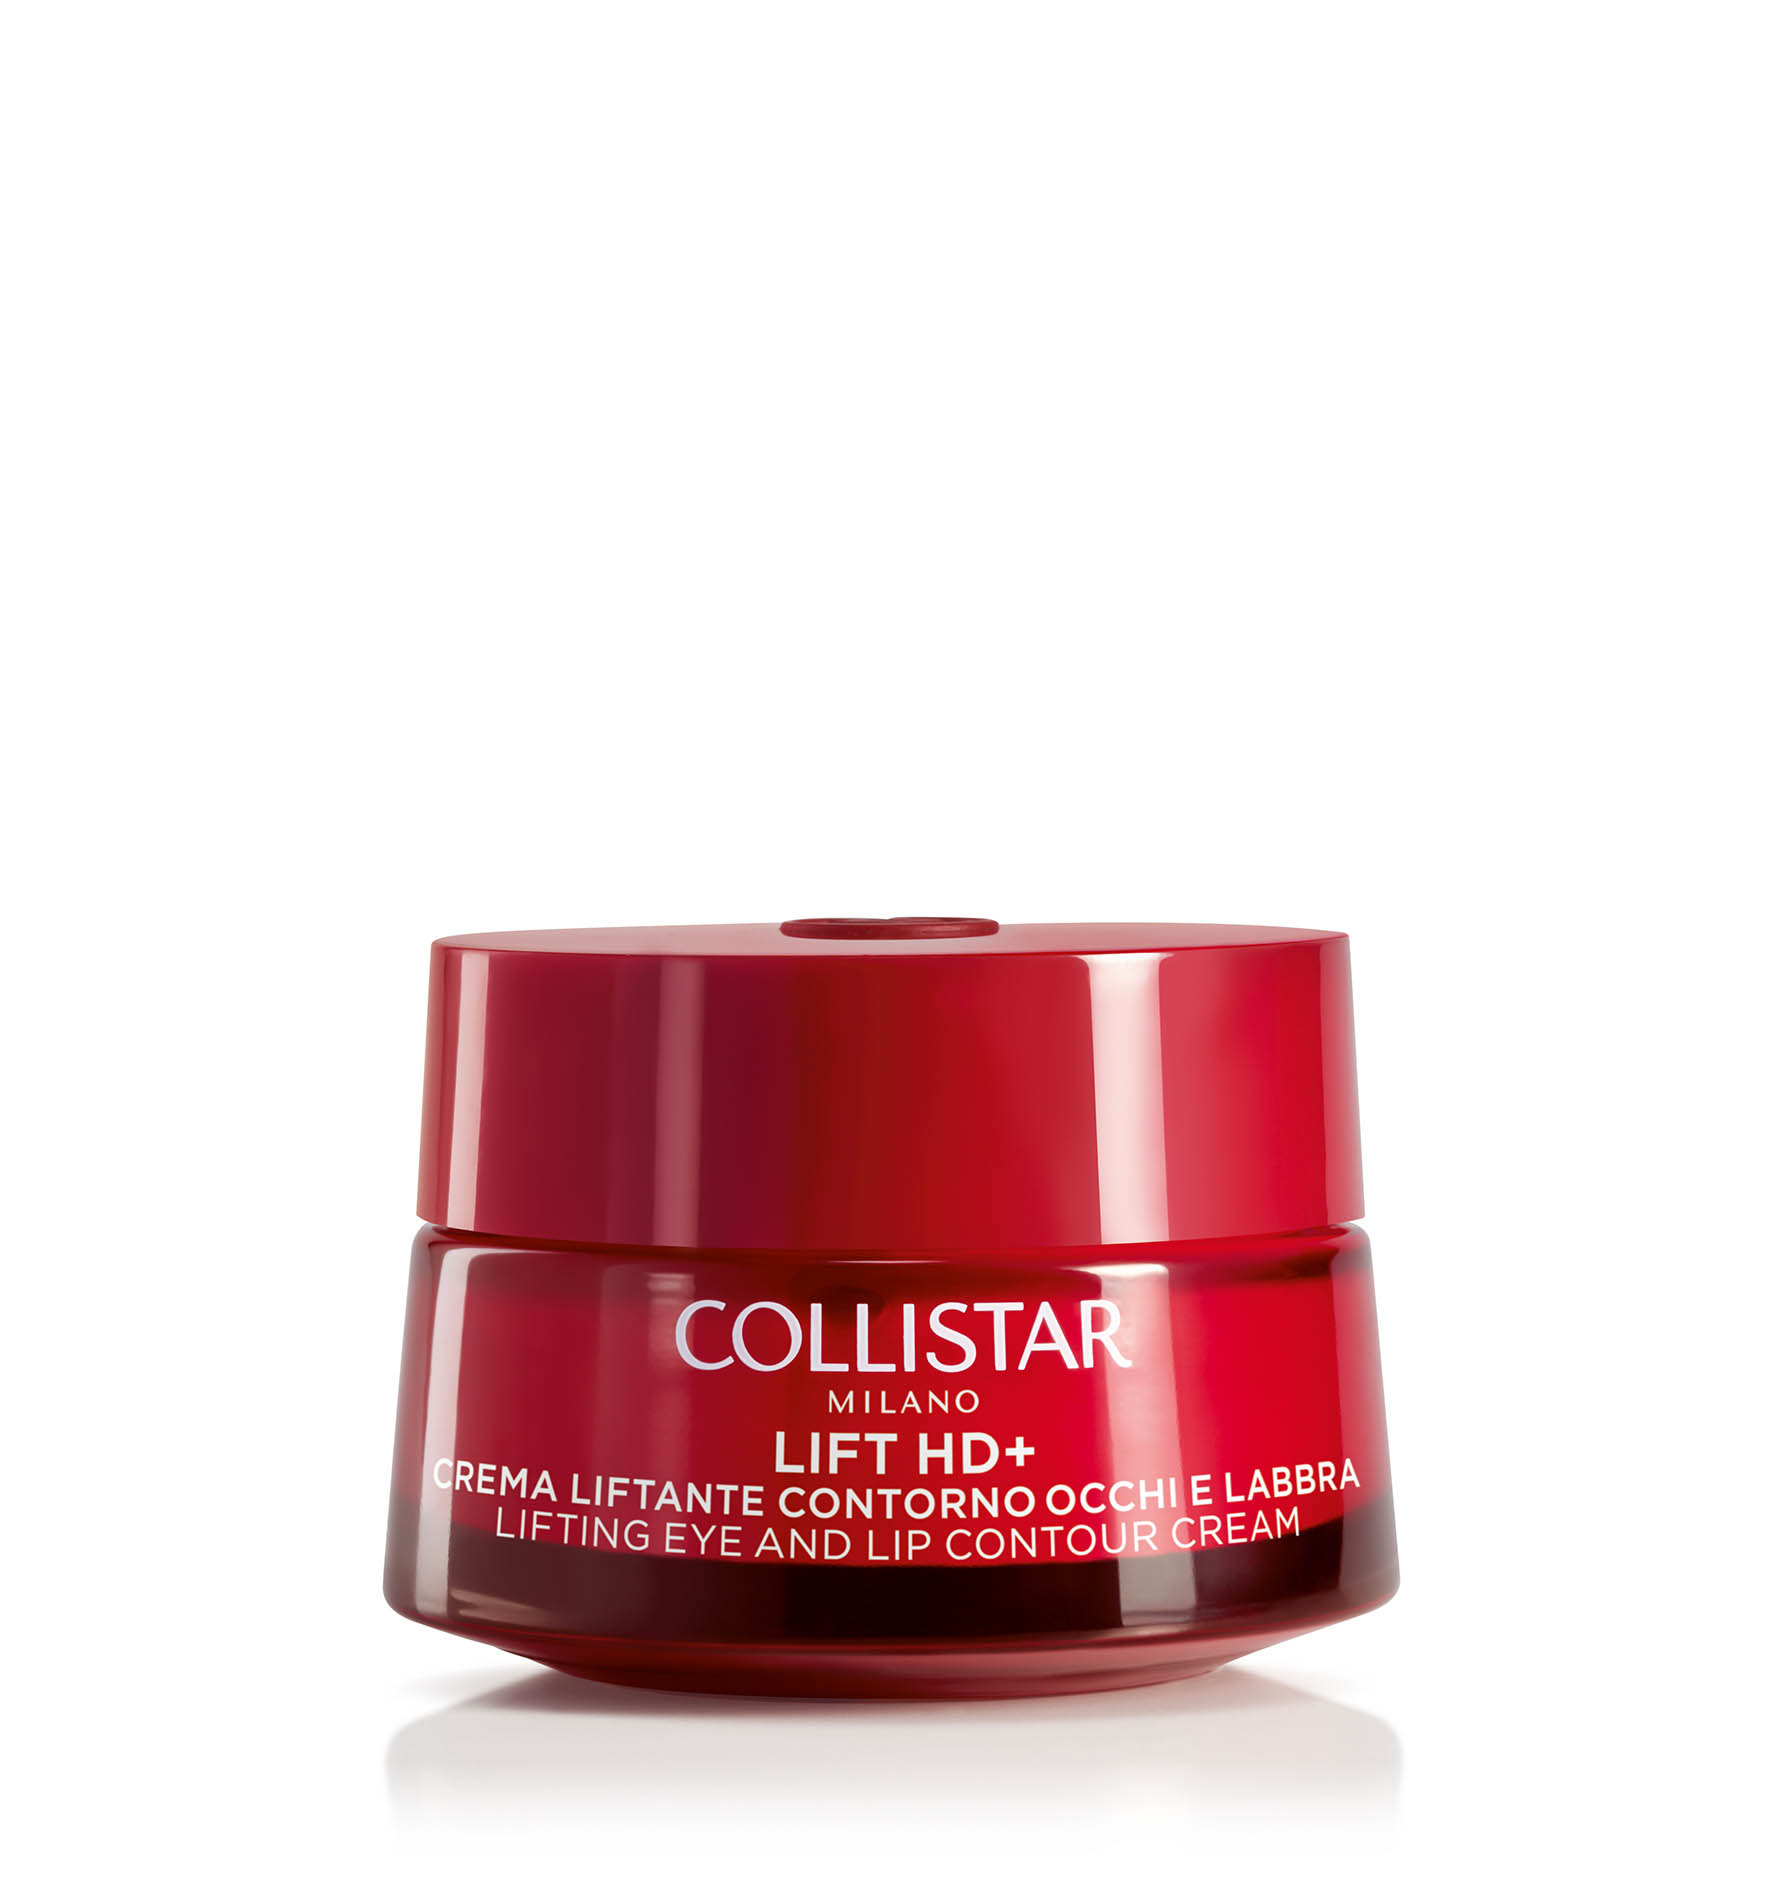 LIFT HD+ LIFTING EYE AND LIP CONTOUR CREAM - Lifting | Collistar - Shop Online Ufficiale